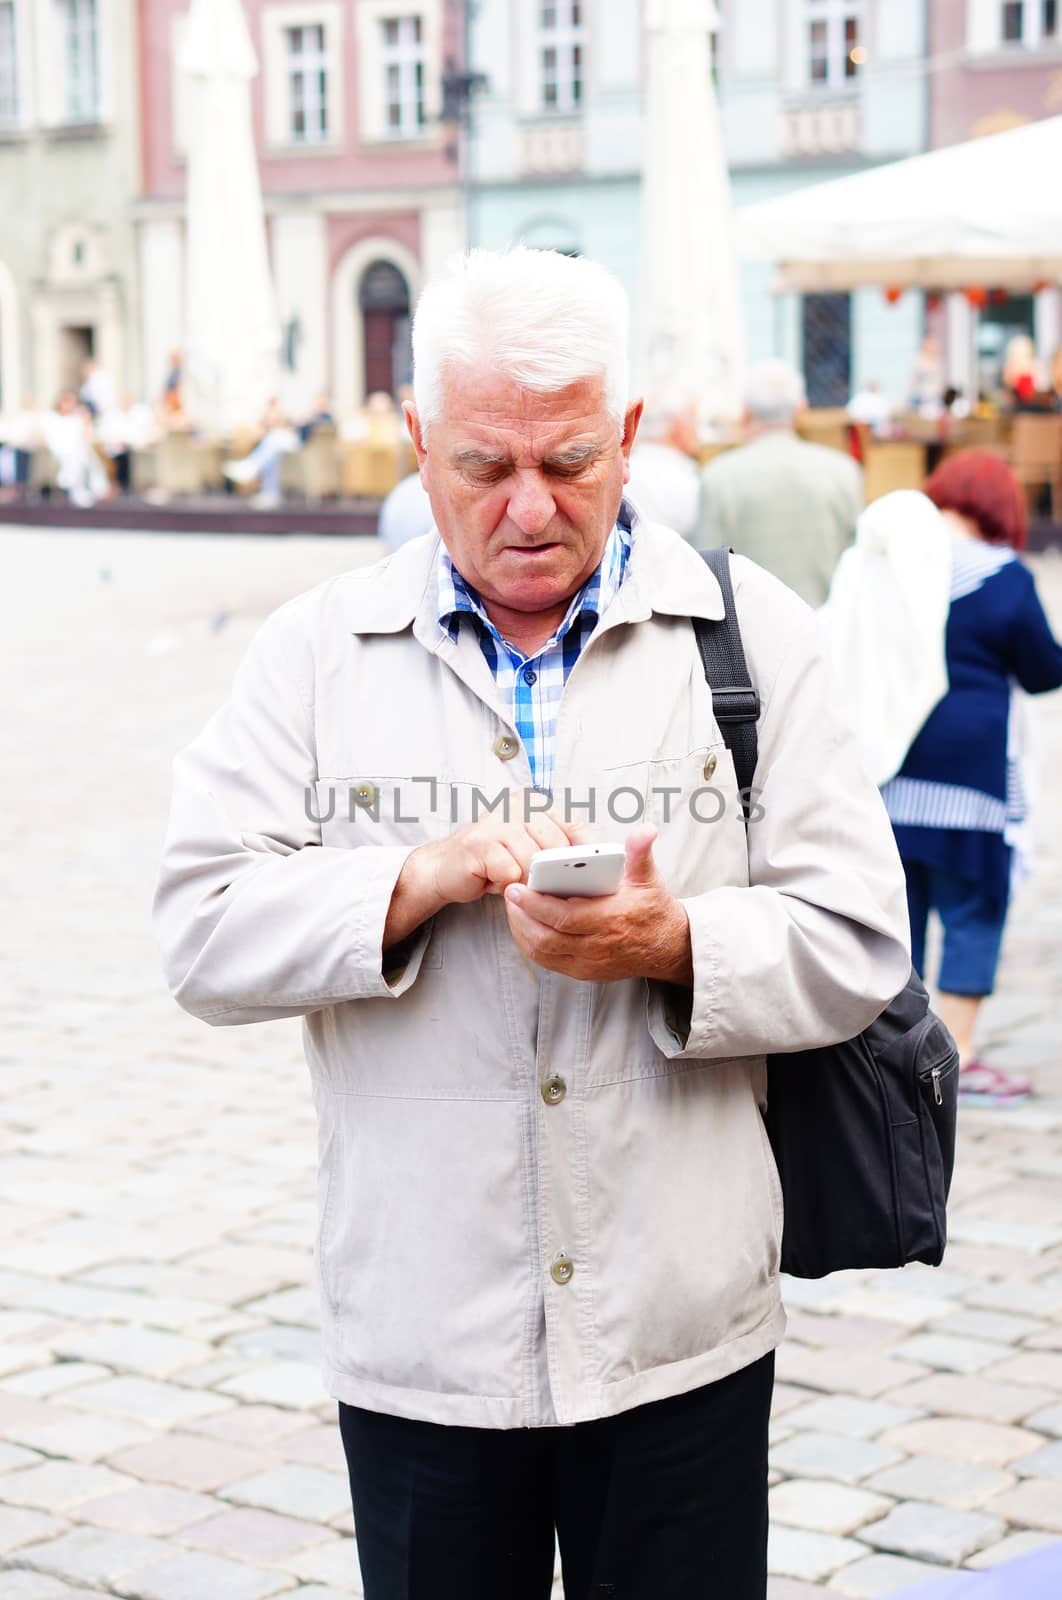 POZNAN, POLAND - SEPTEMBER 13, 2014: Elderly man checking his phone at the old square